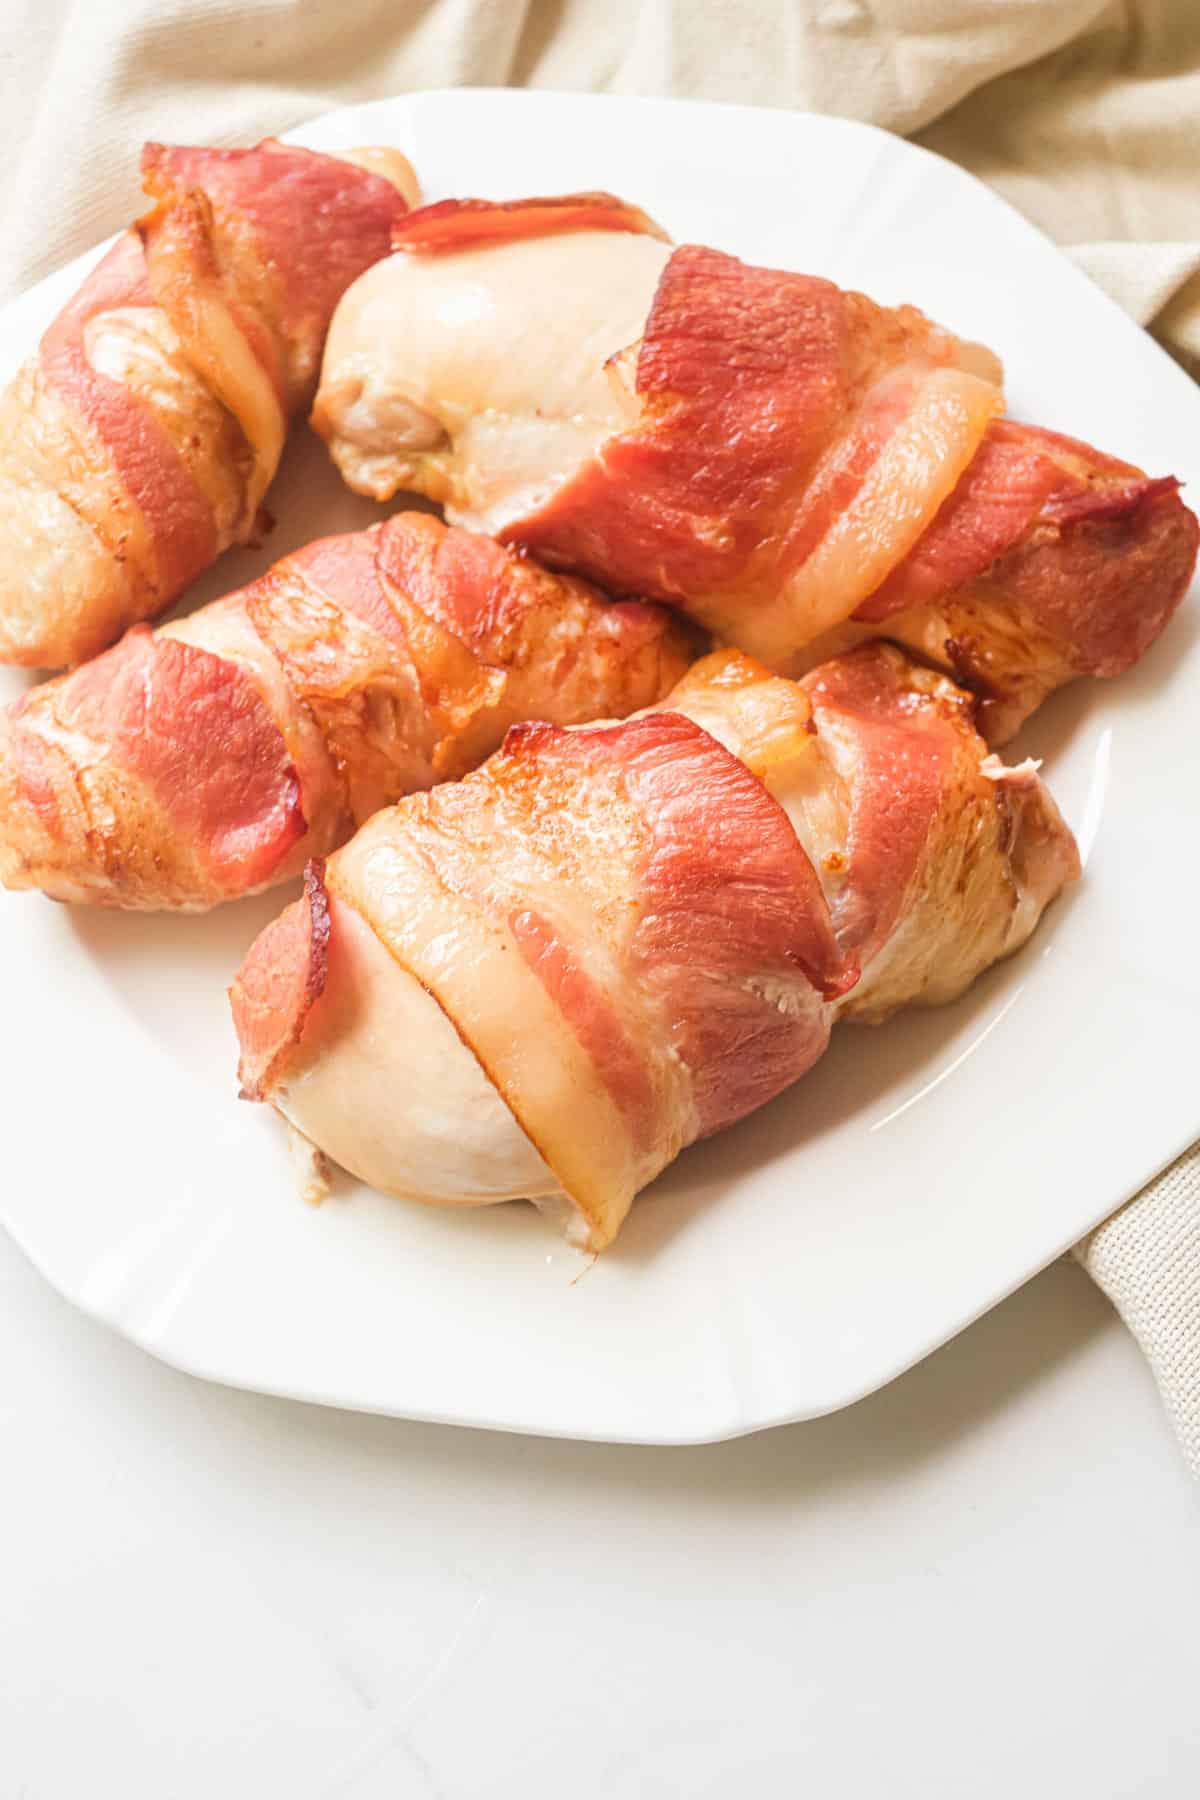 the finished bacon wrapped chicken breast on a white plate